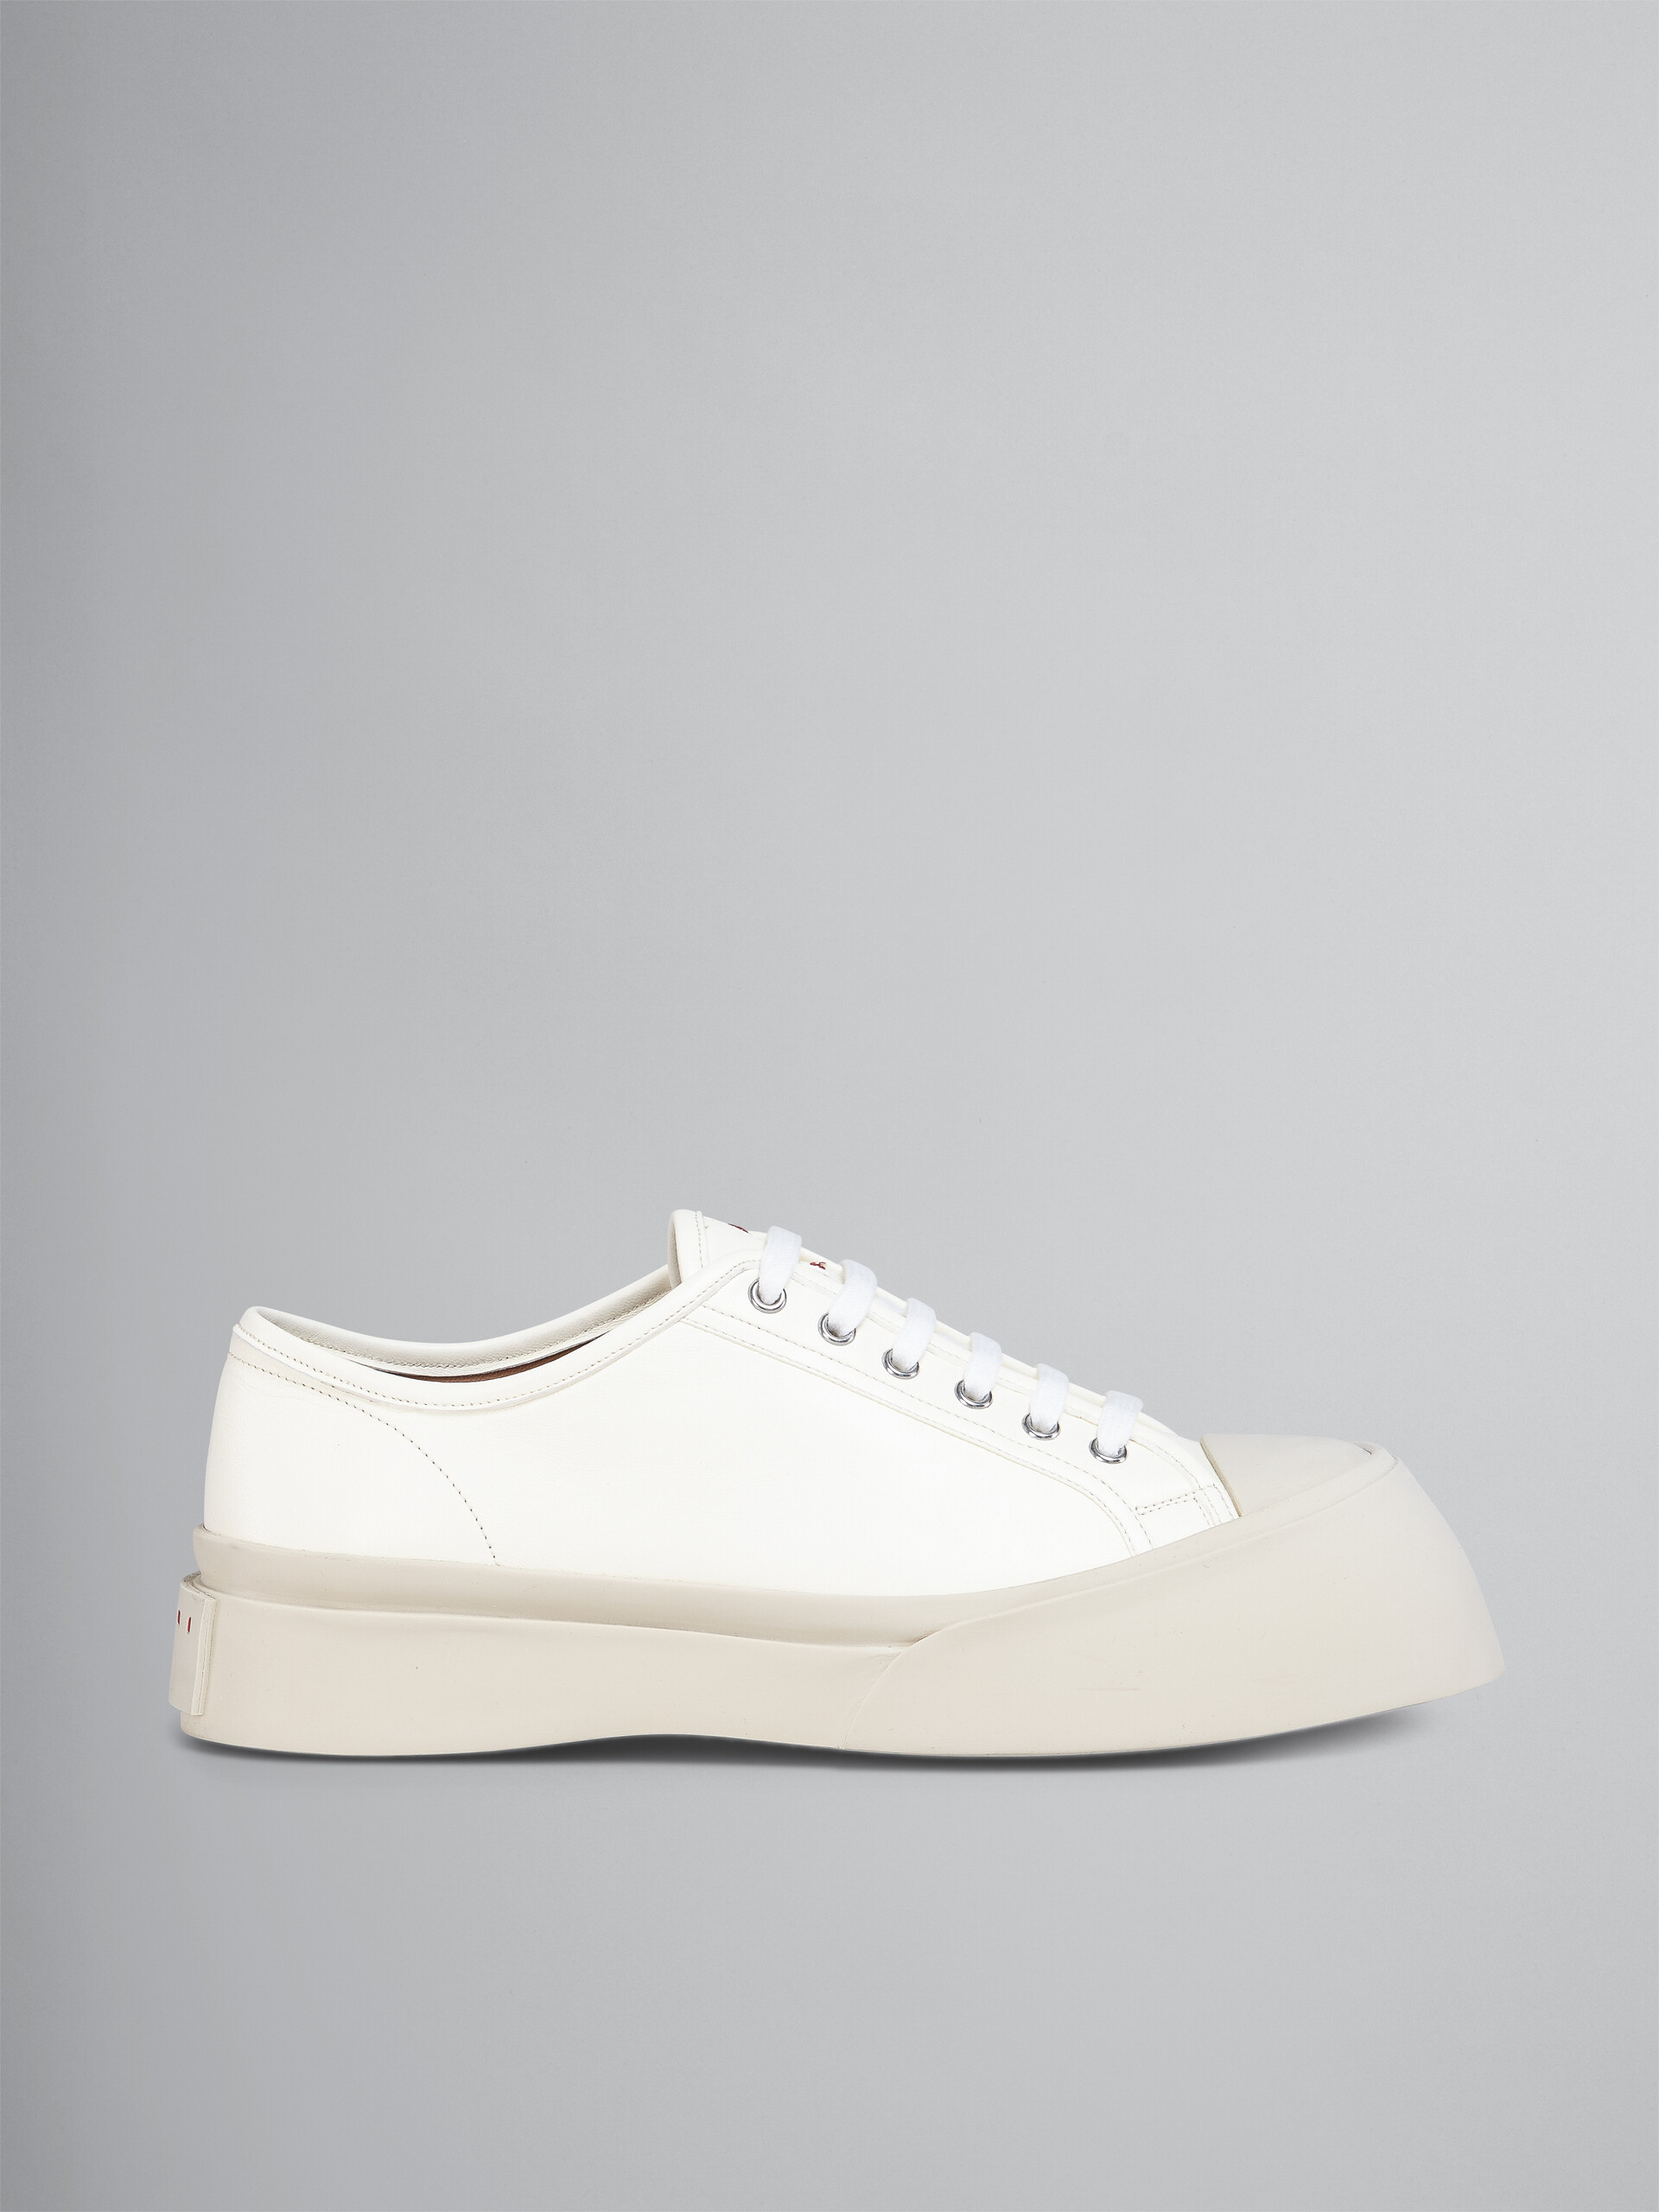 Blue nappa leather Pablo sneaker - Sneakers - Image 1